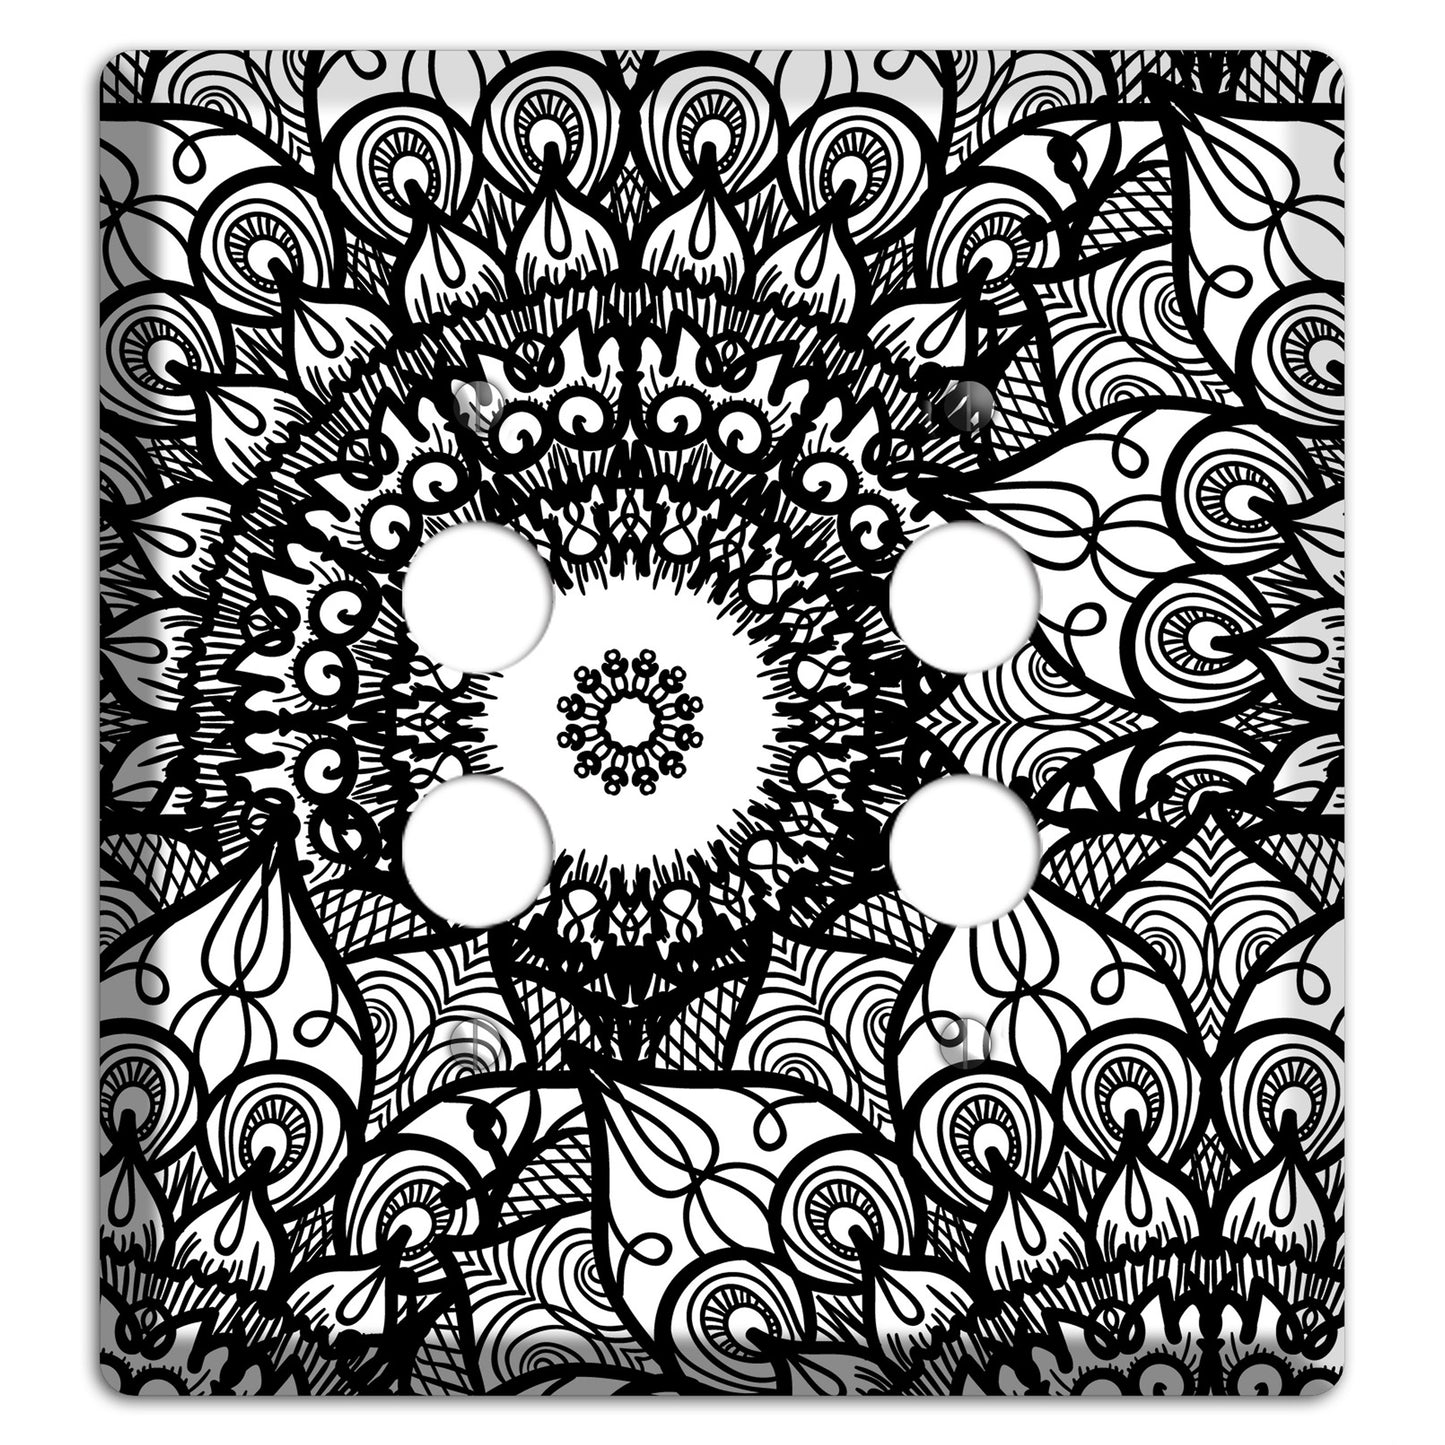 Mandala Black and White Style V Cover Plates 2 Pushbutton Wallplate